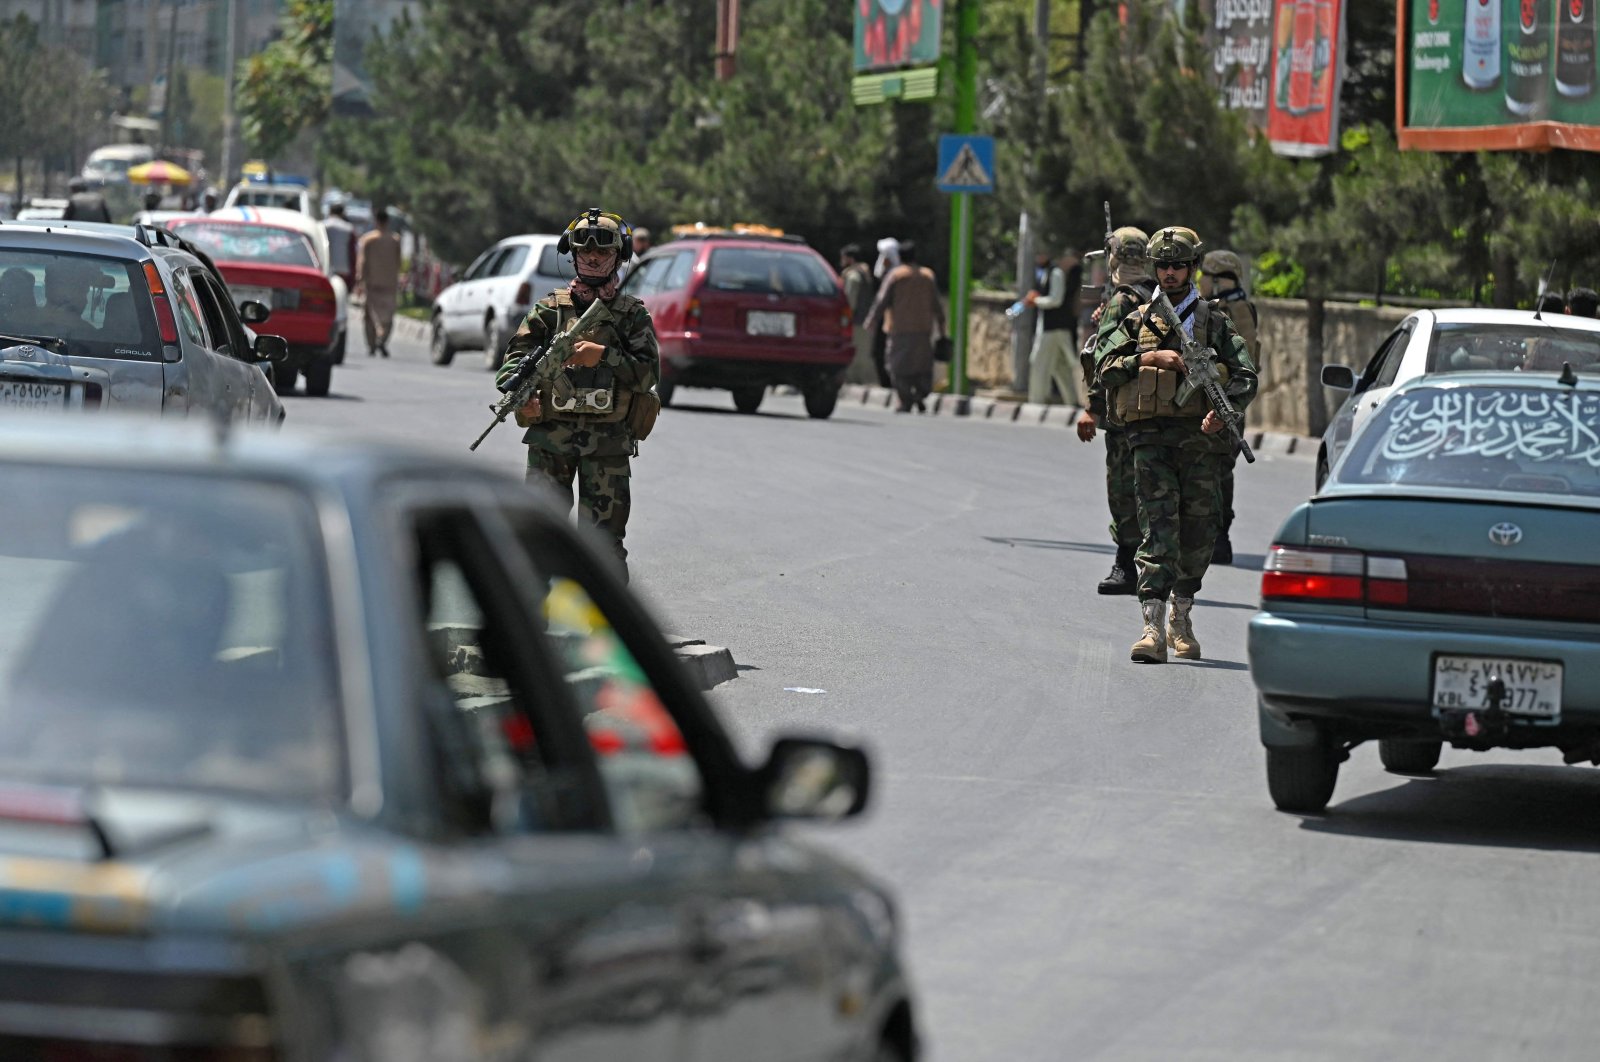 Taliban Fateh fighters, a special forces unit, patrol along a street in Kabul as suicide bomb threats hung over the final phase of the U.S. military's airlift operation, Kabul, Afghanistan, August 29, 2021,  (AFP Photo)